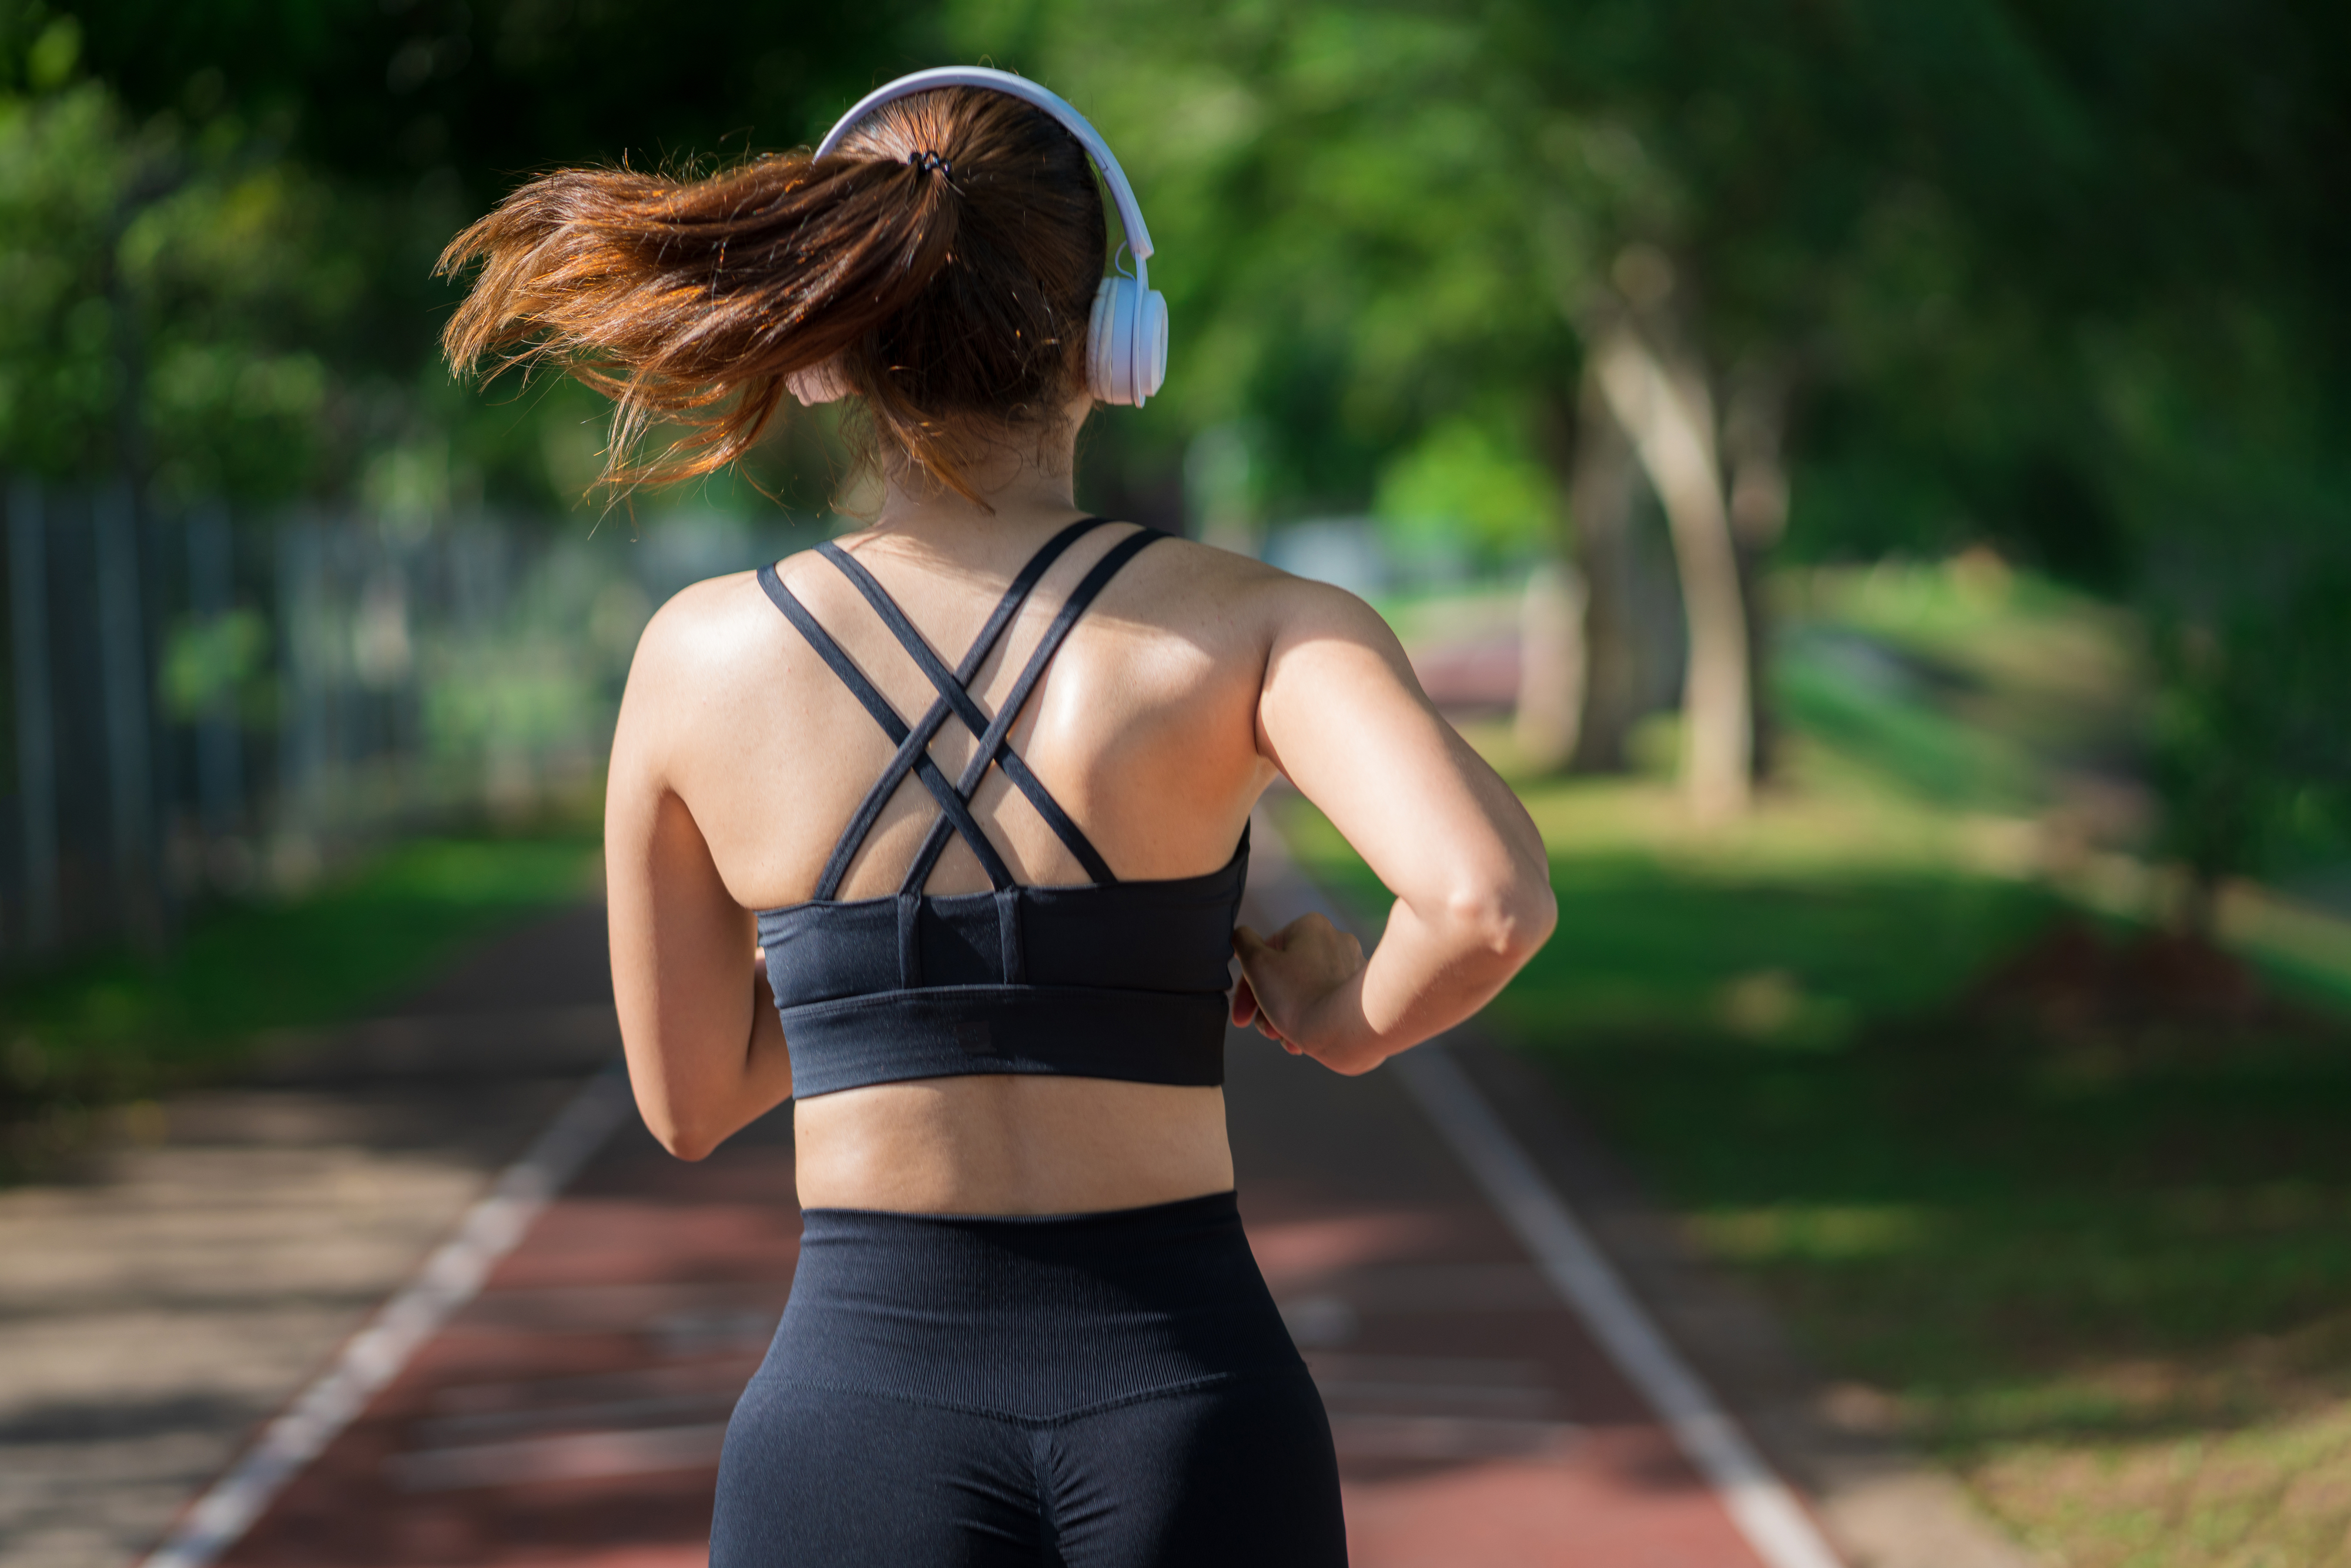 Person jogging on track in sportswear with headphones, seen from behind